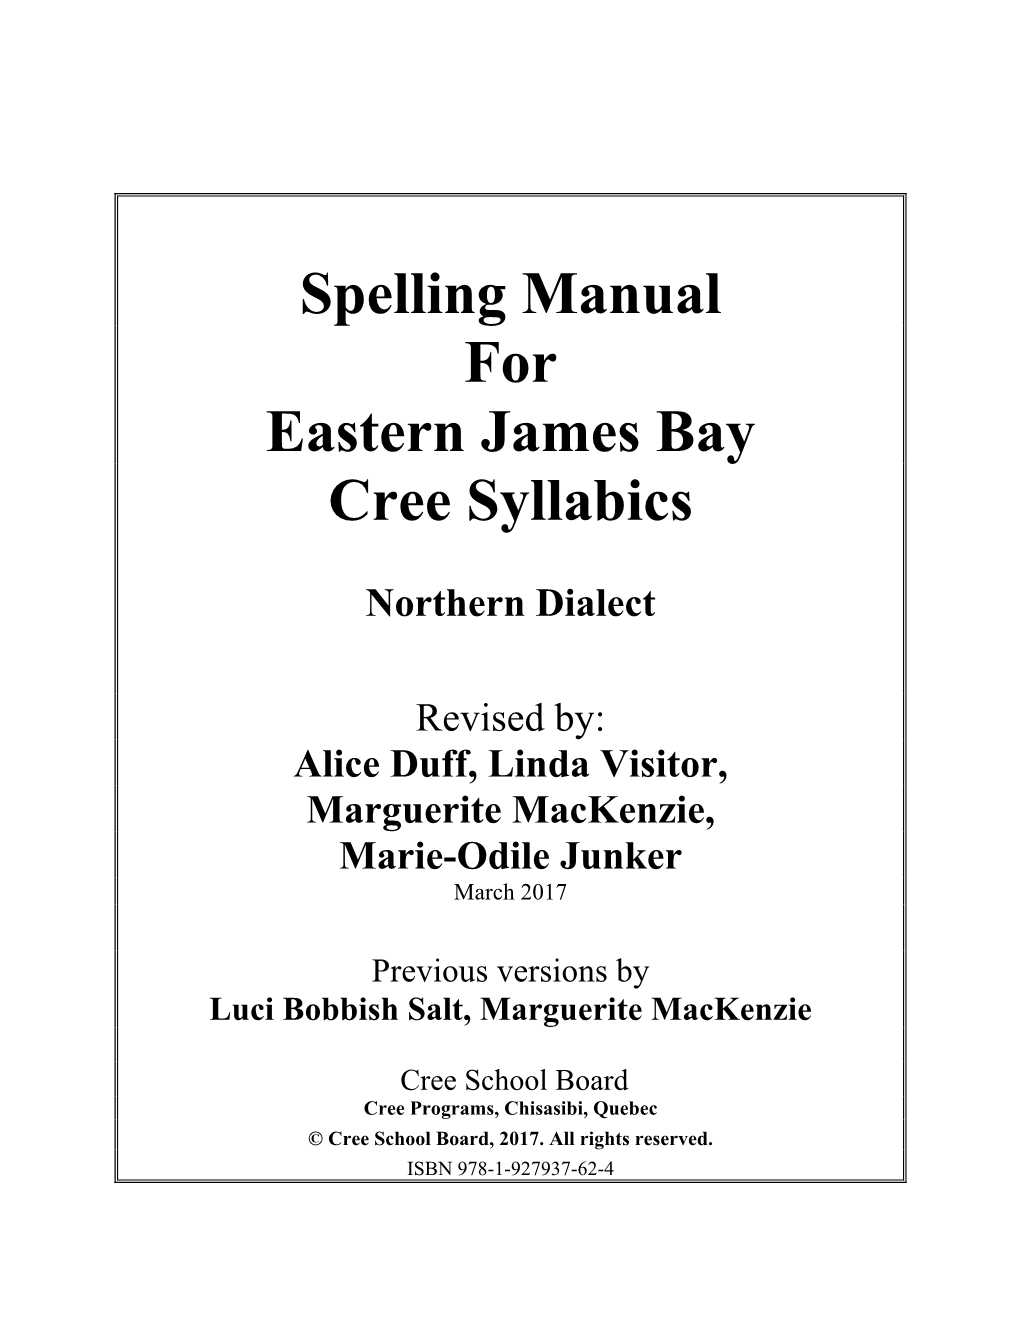 Spelling Manual for Eastern James Bay Cree Syllabics